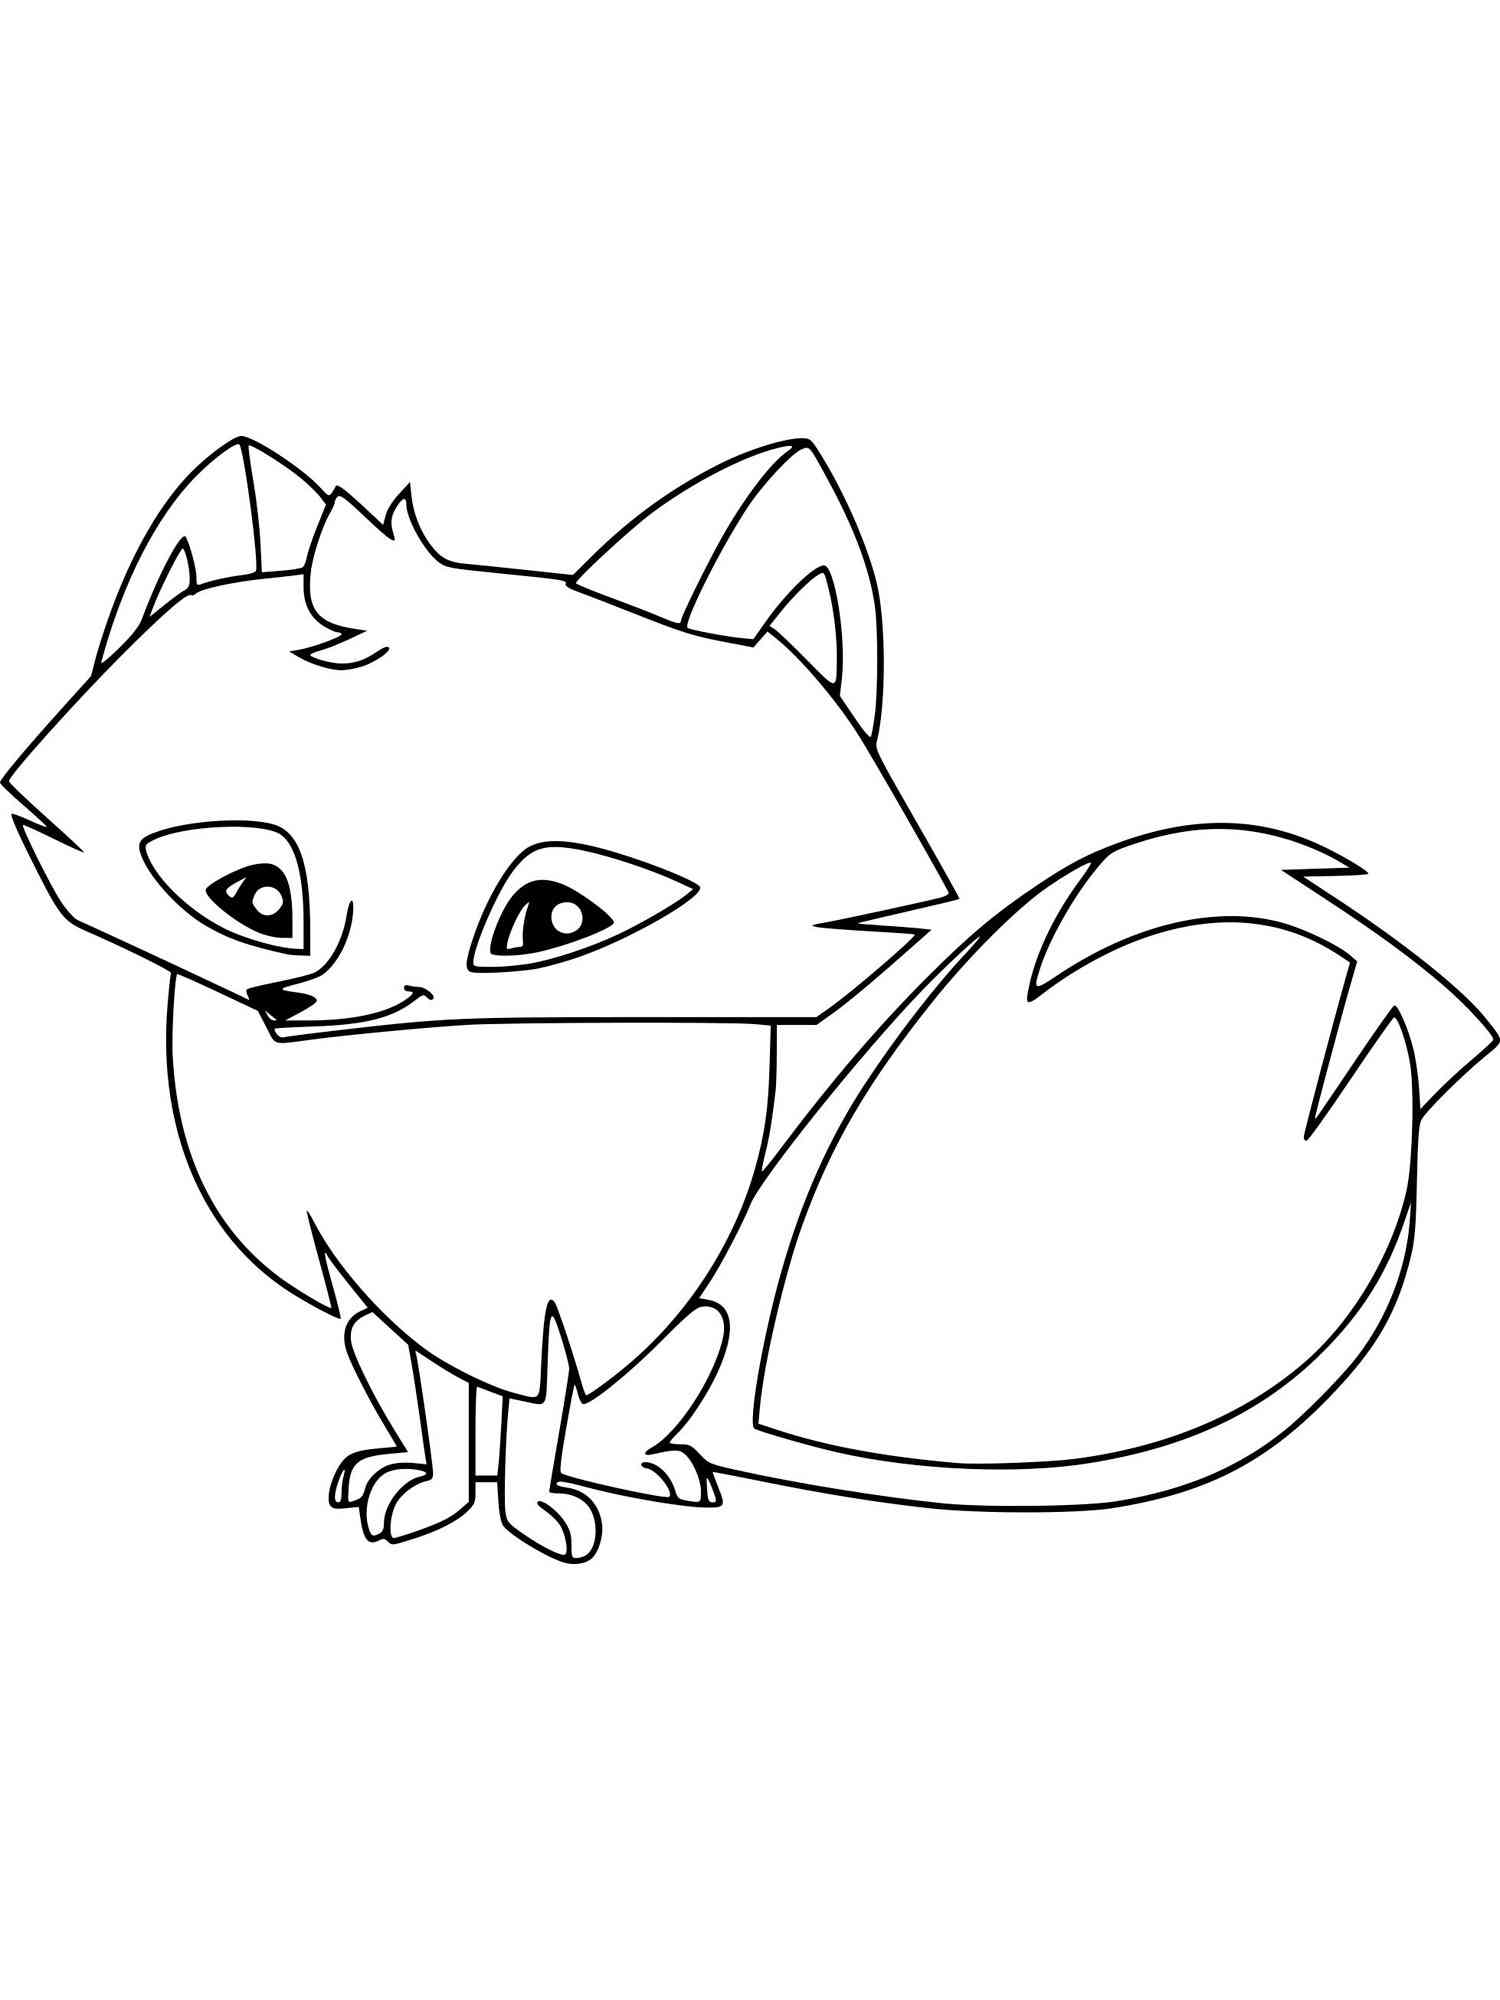 Animal Jam coloring pages. Free printable Animal Jam coloring pages